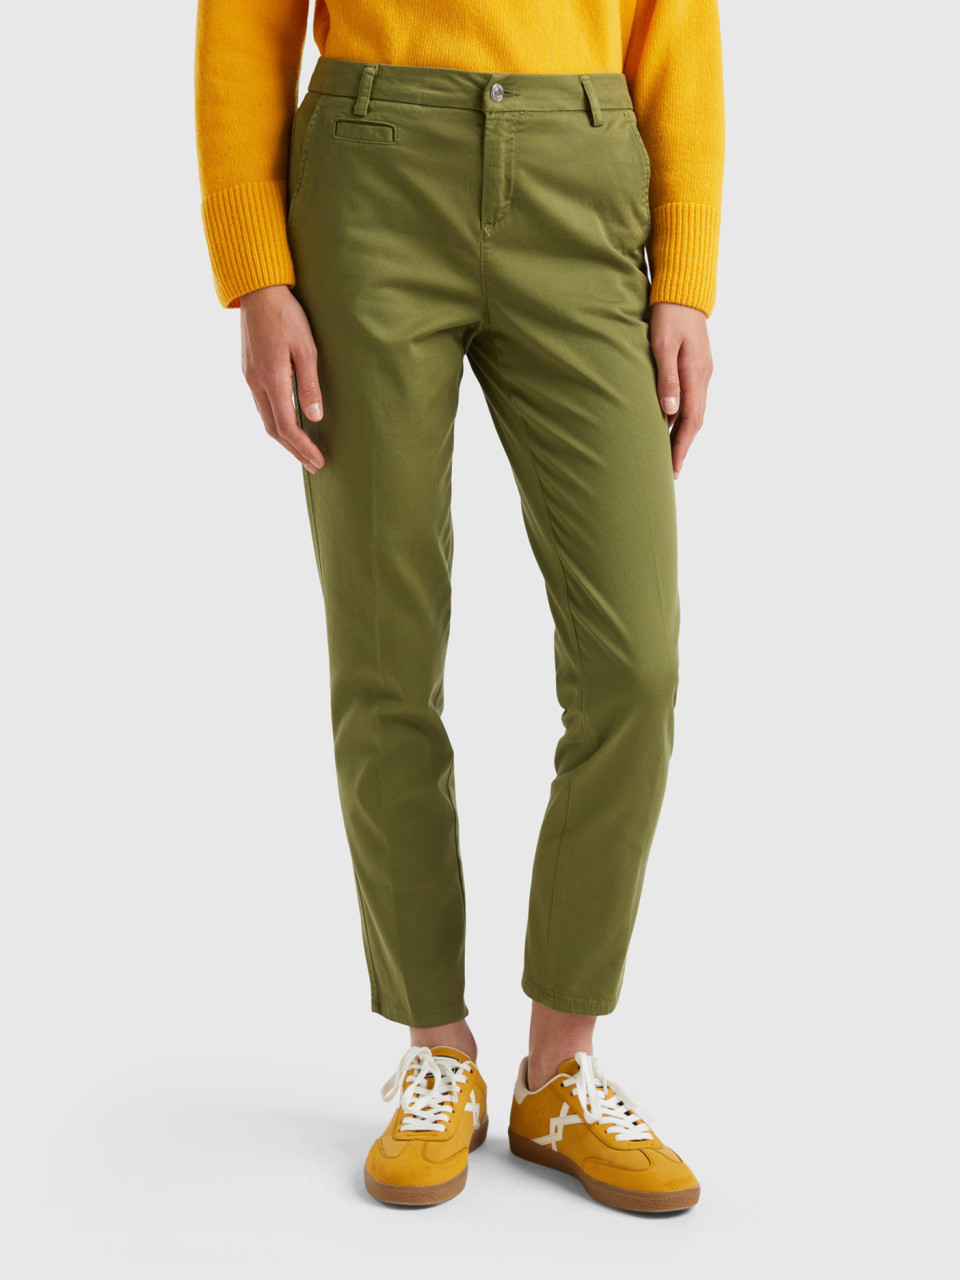 Benetton, Army Green Slim Fit Chinos, Military Green, Women